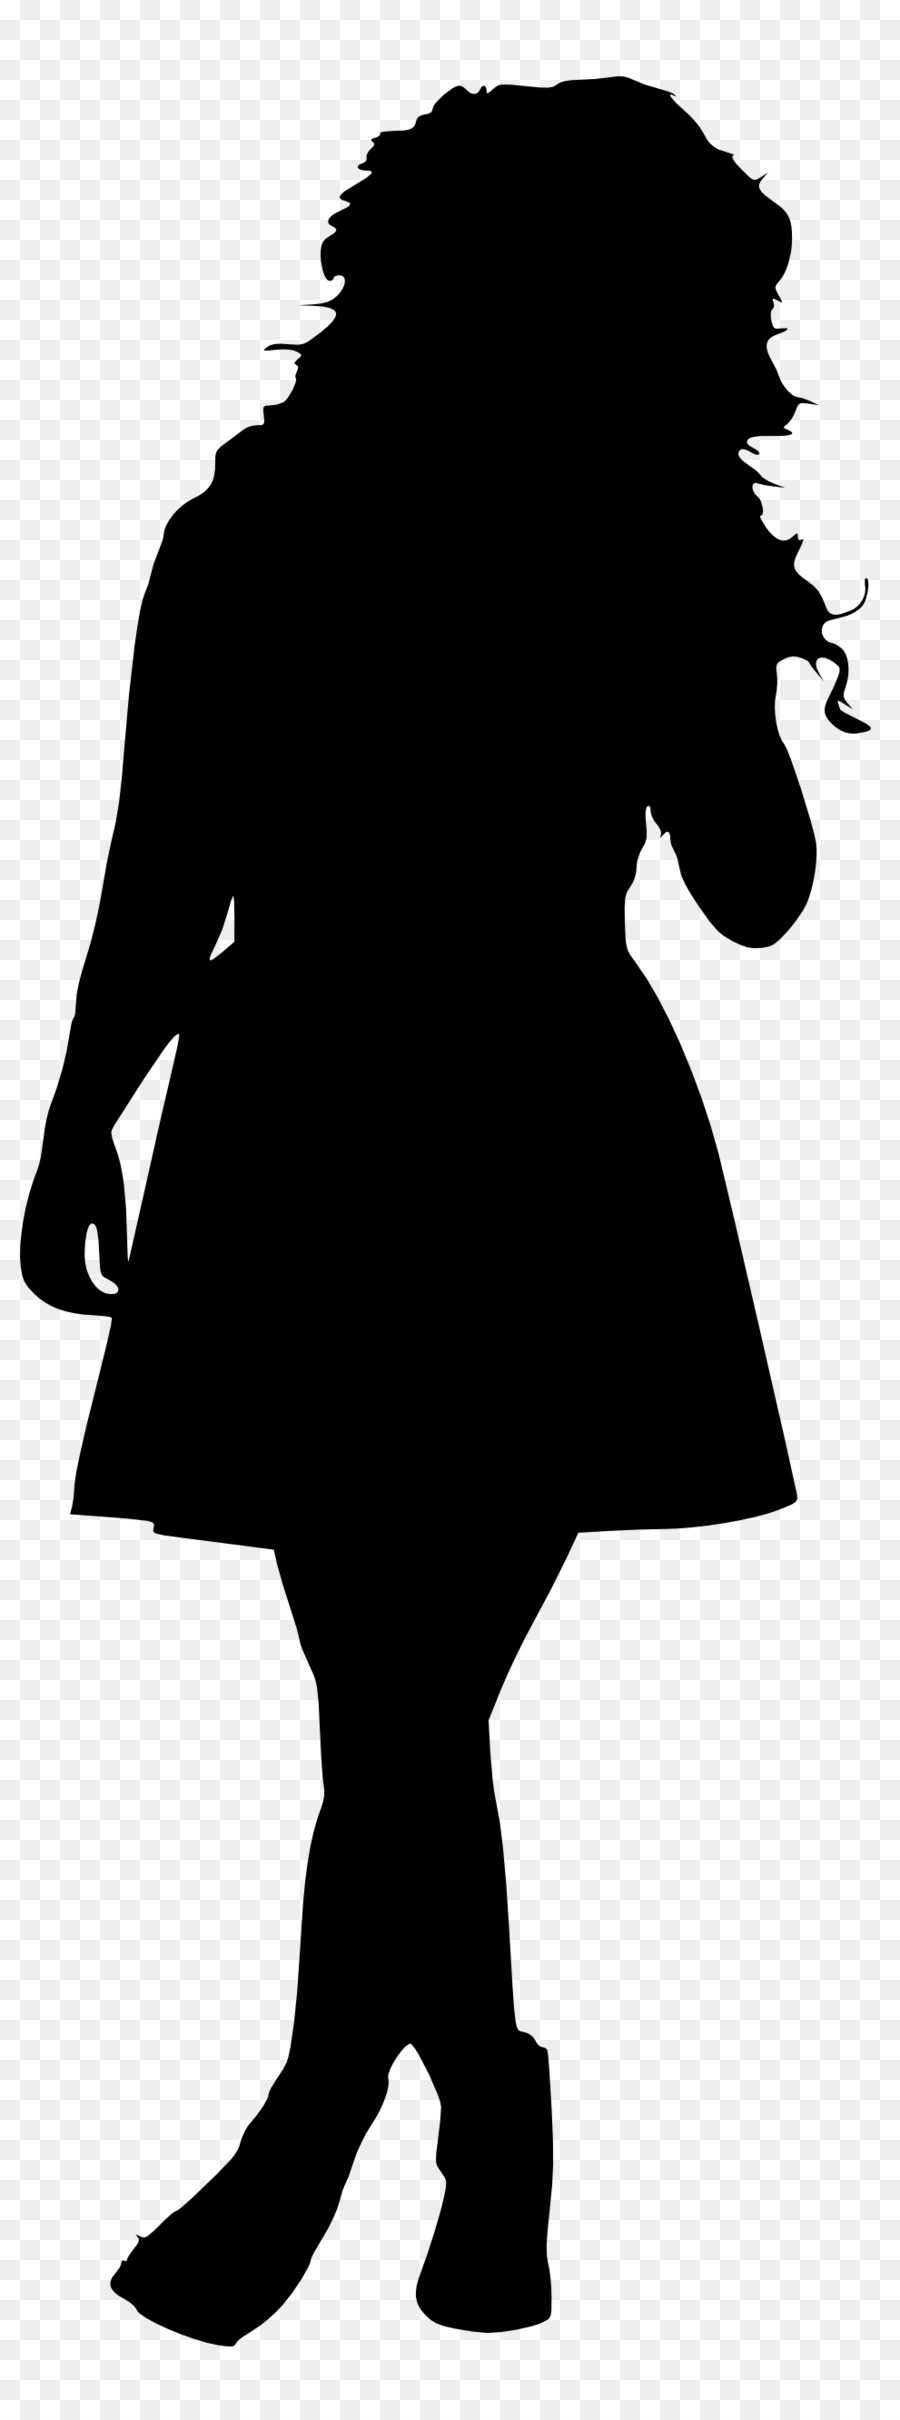 Free Girl Silhouette Transparent Download Free Clip Art Free Clip Art On Clipart Library